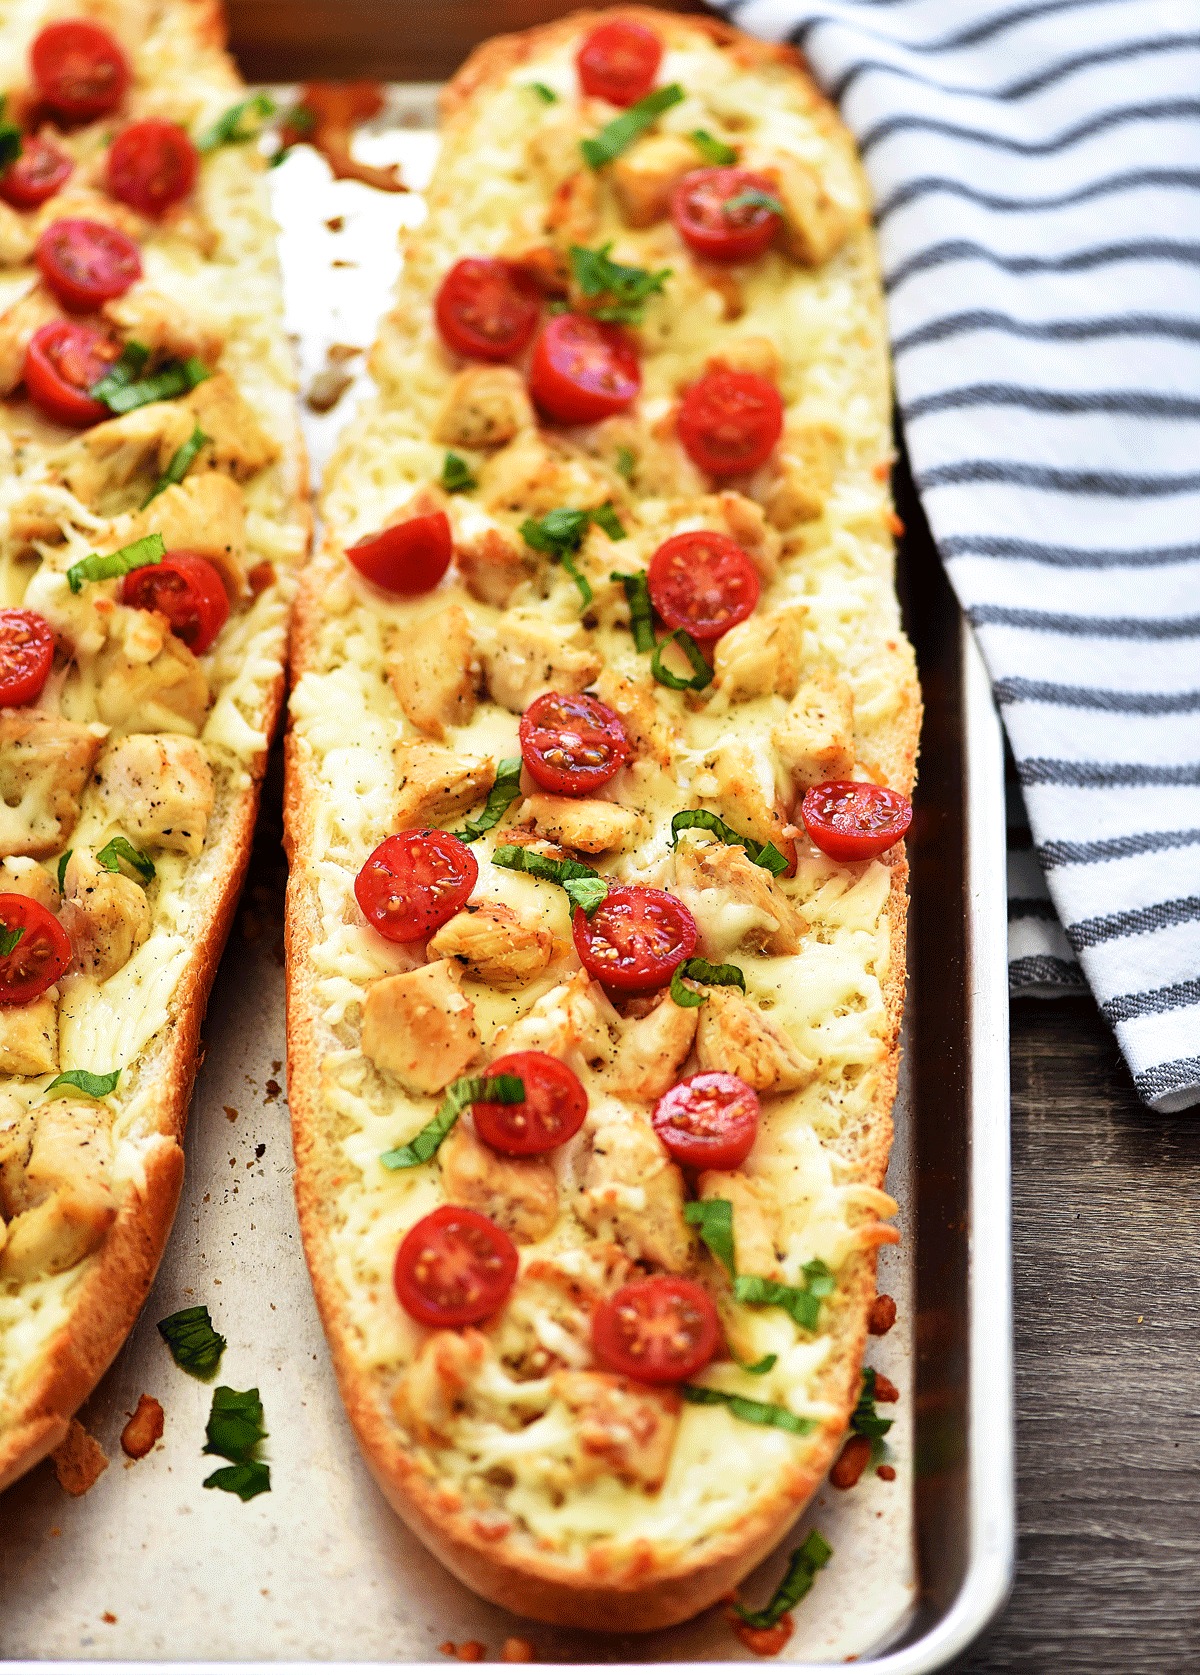 Garlic Bread with Chicken, Cheese and Tomatoes